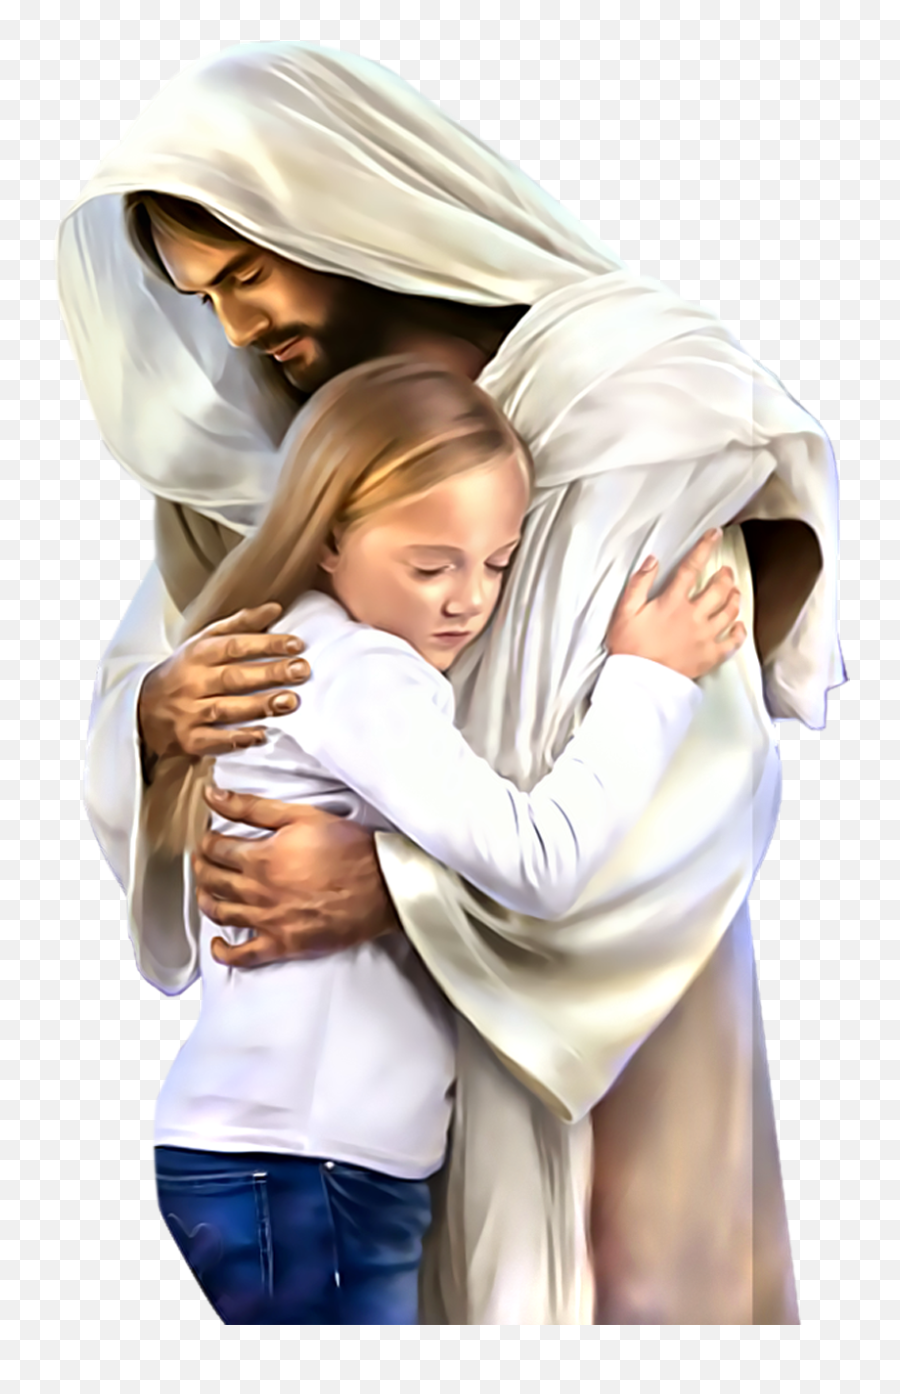 Png Clipart Jesus 36069 - Free Icons And Png Backgrounds Jesus Hug Png,Jesus Hands Png